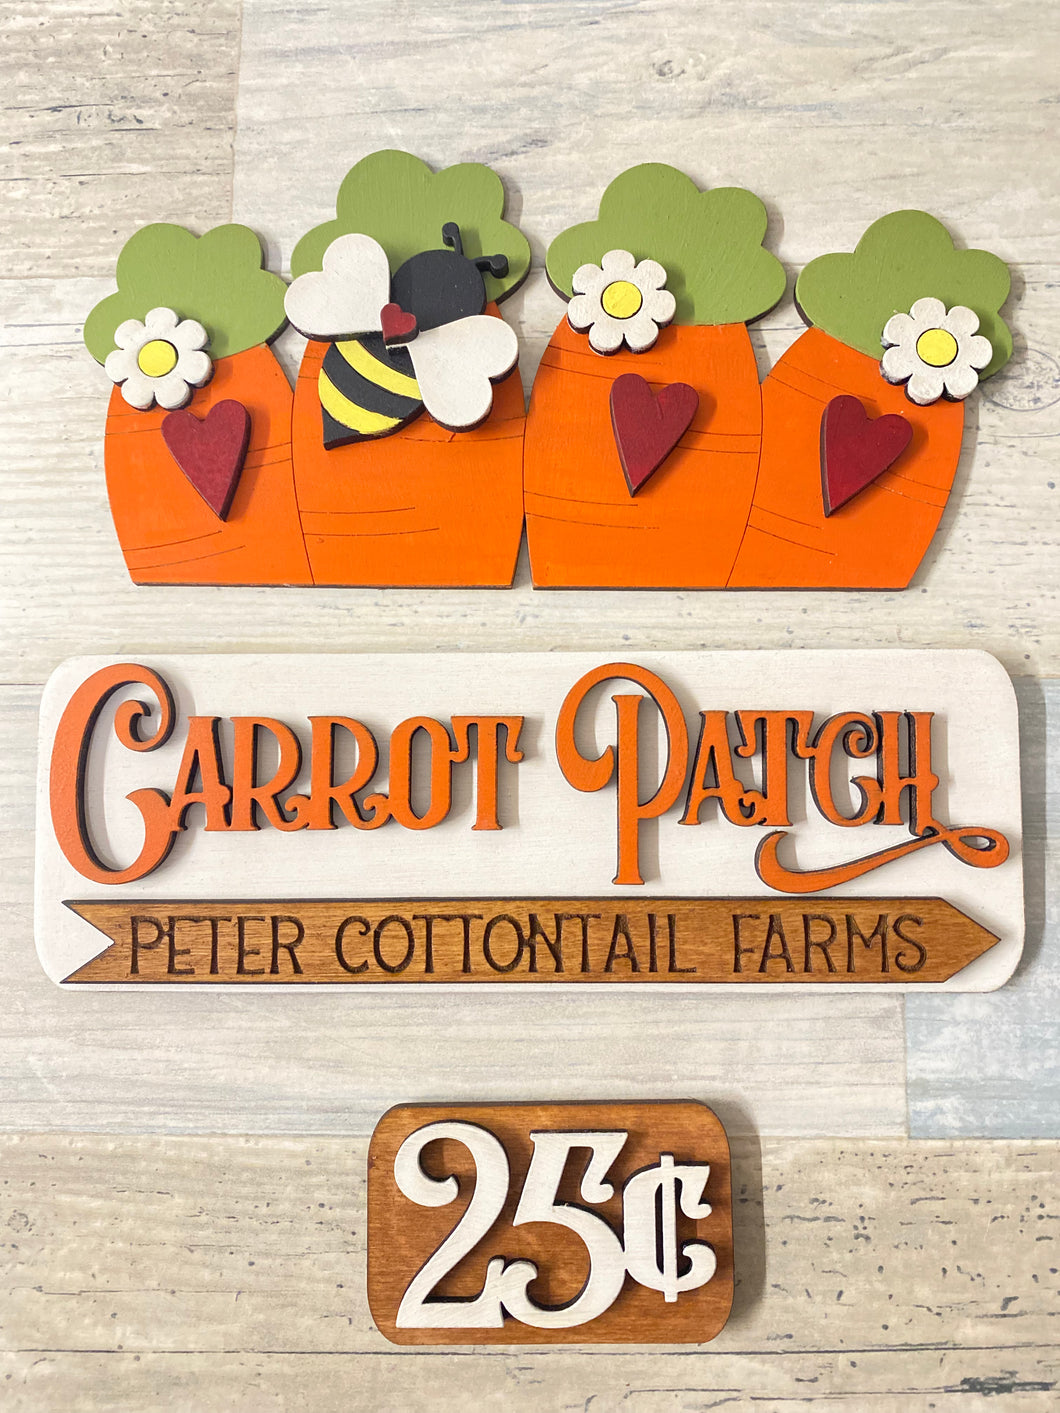 Carrot Patch Vintage Truck Inserts